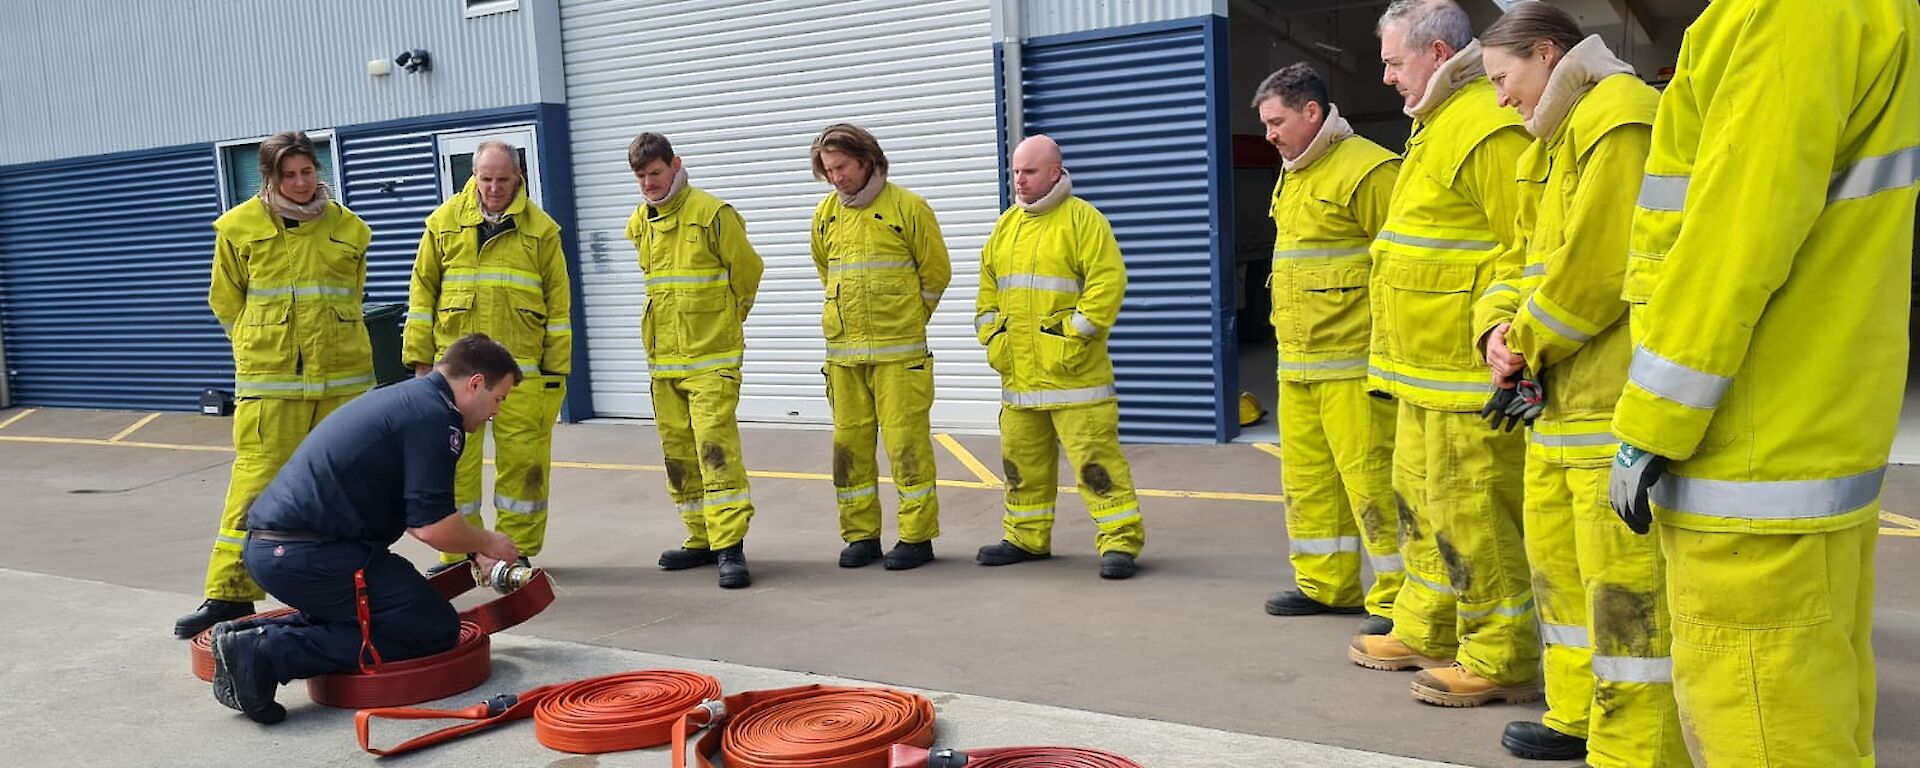 A group of people wearing bright yellow fire-fighting suits watch a man in a blue uniform rolling up a large orange fire hose.